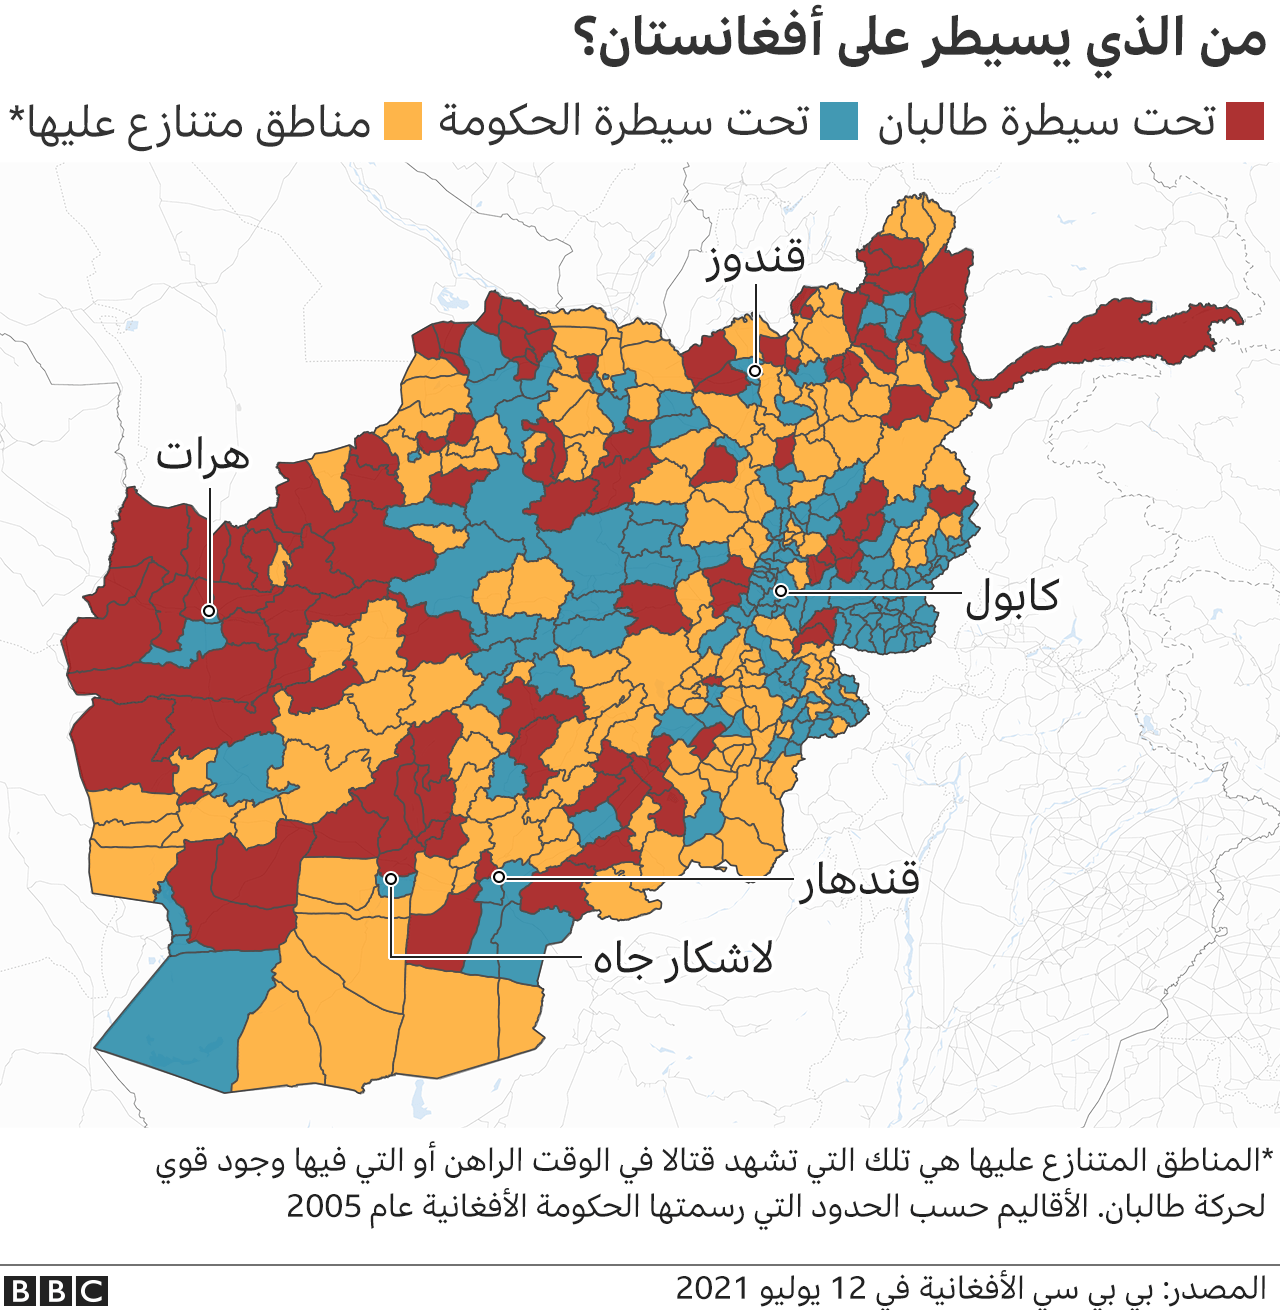 Taliban and government-held territories and disputed territories